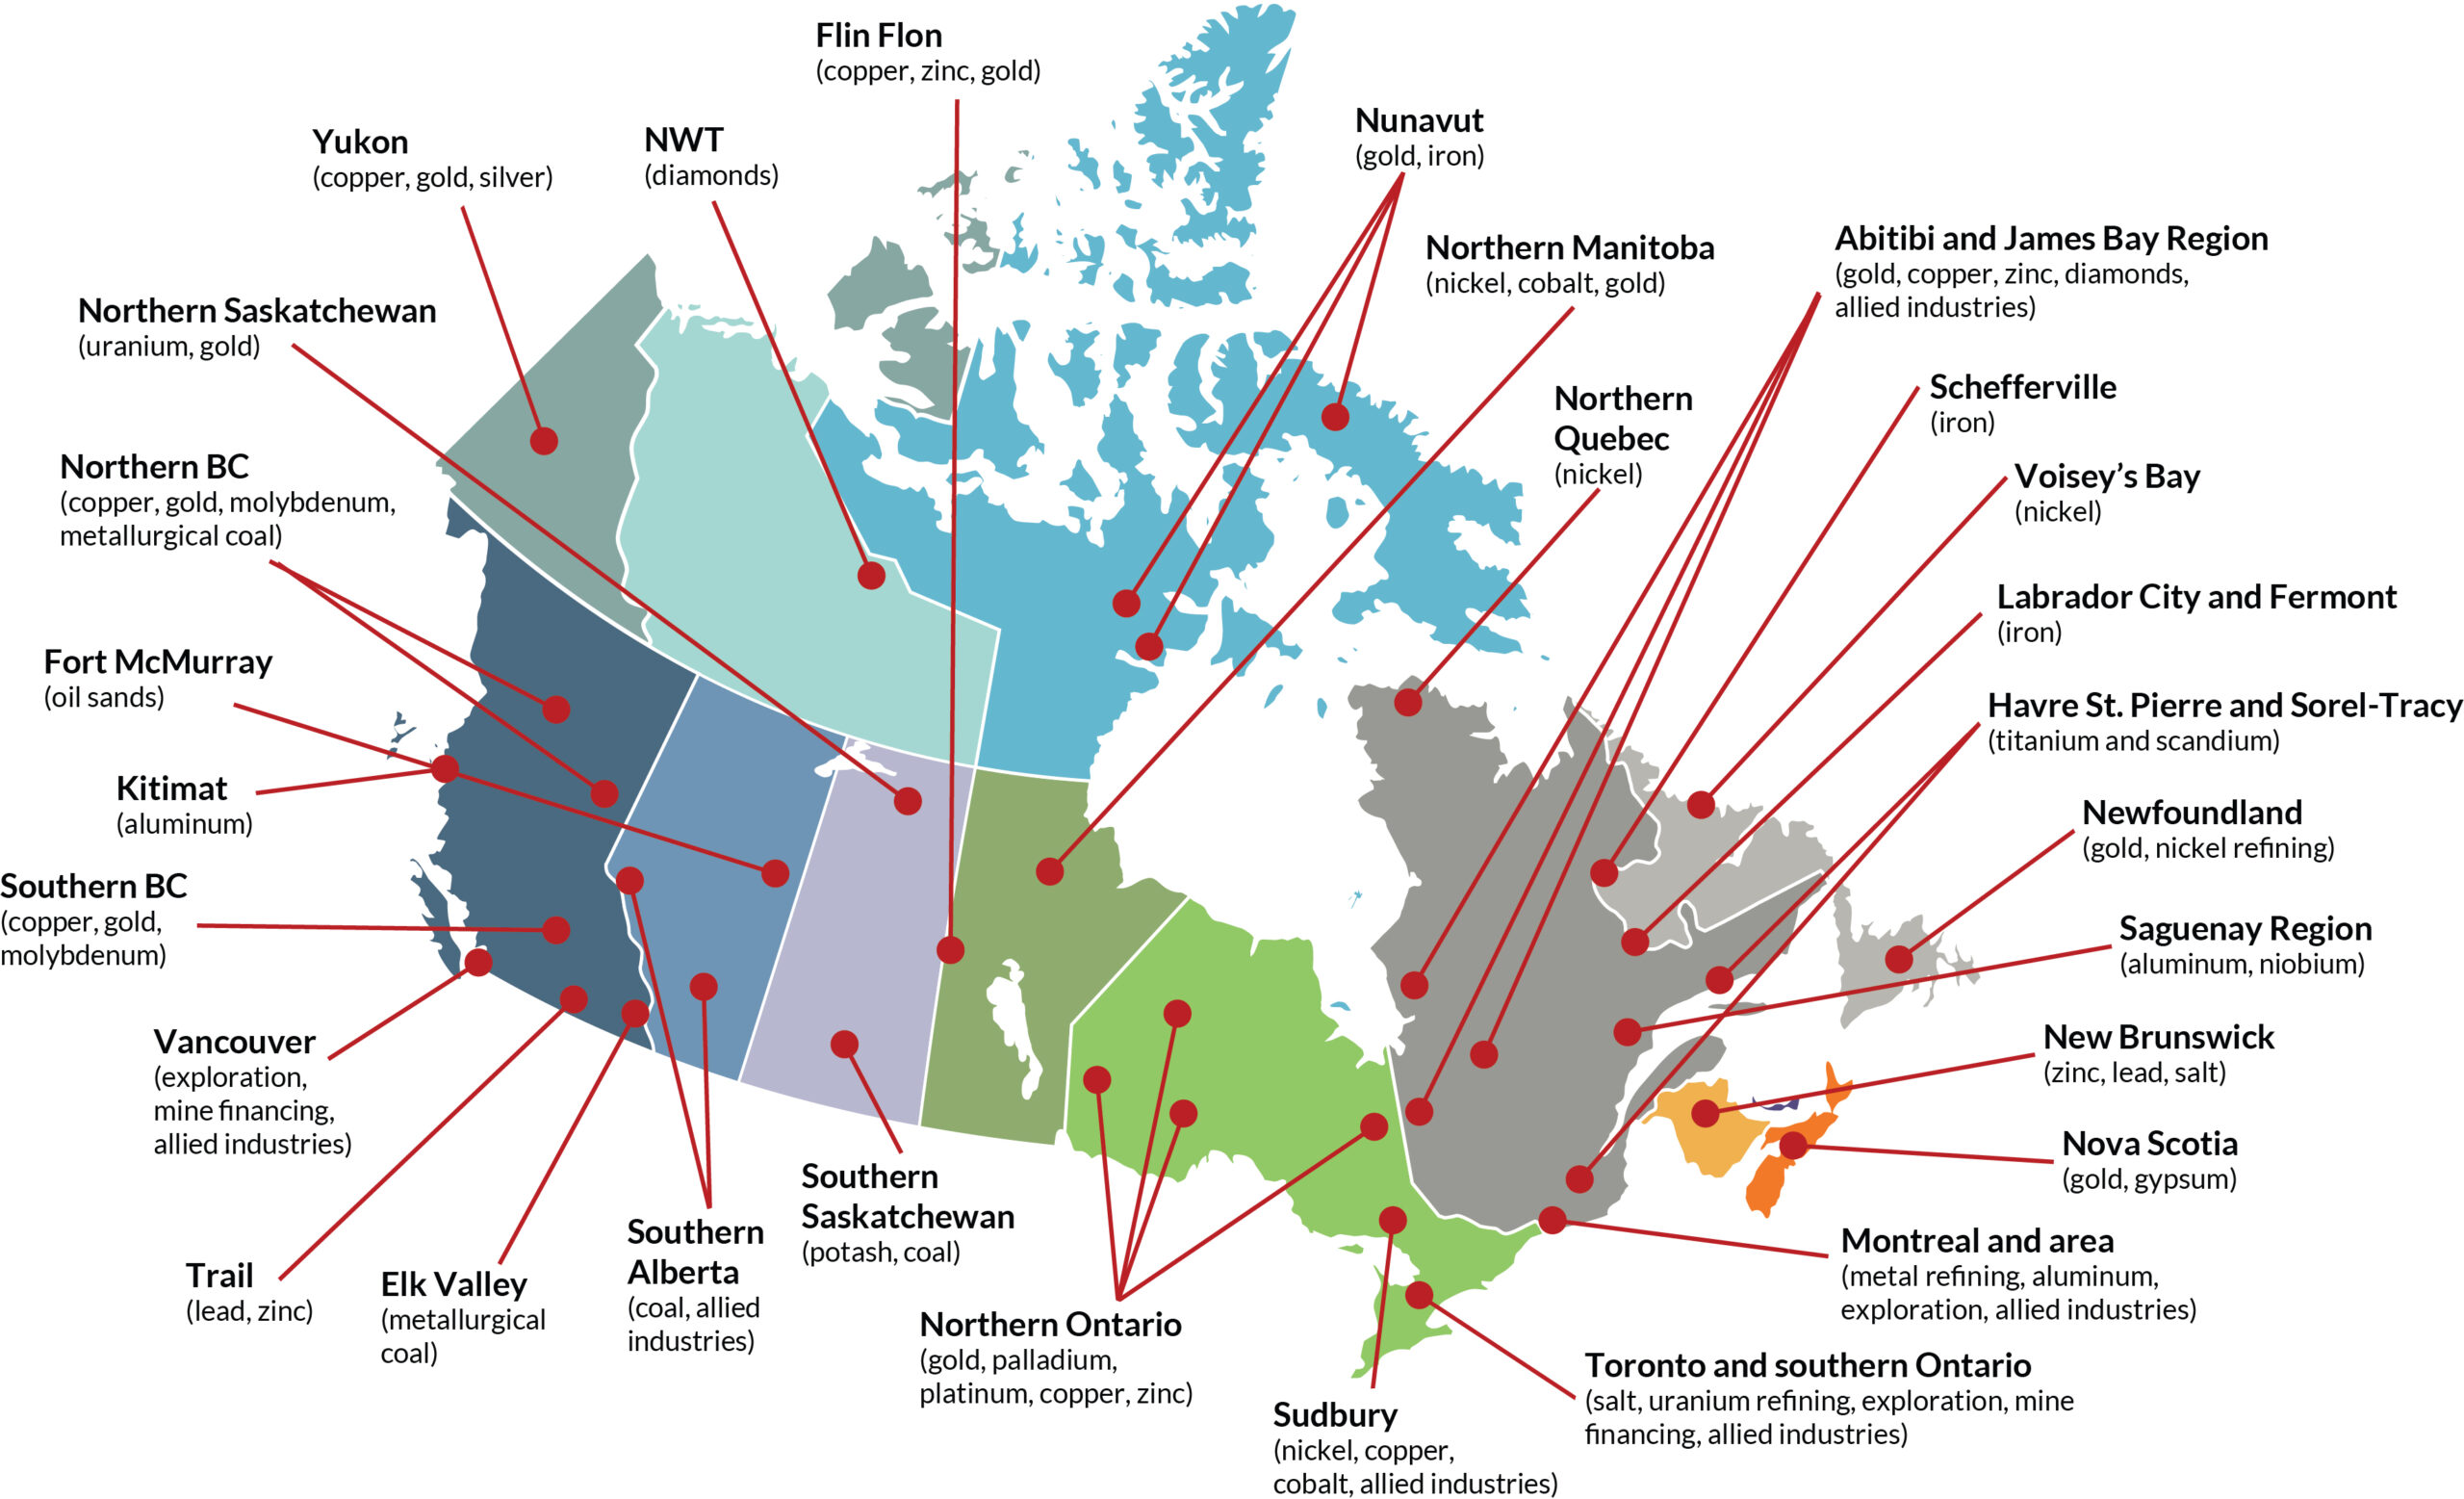 Canada mines 60 different minerals and metals from around 200 mines and 6500 quarries, such as gold, iron ore, cobalt, nickel